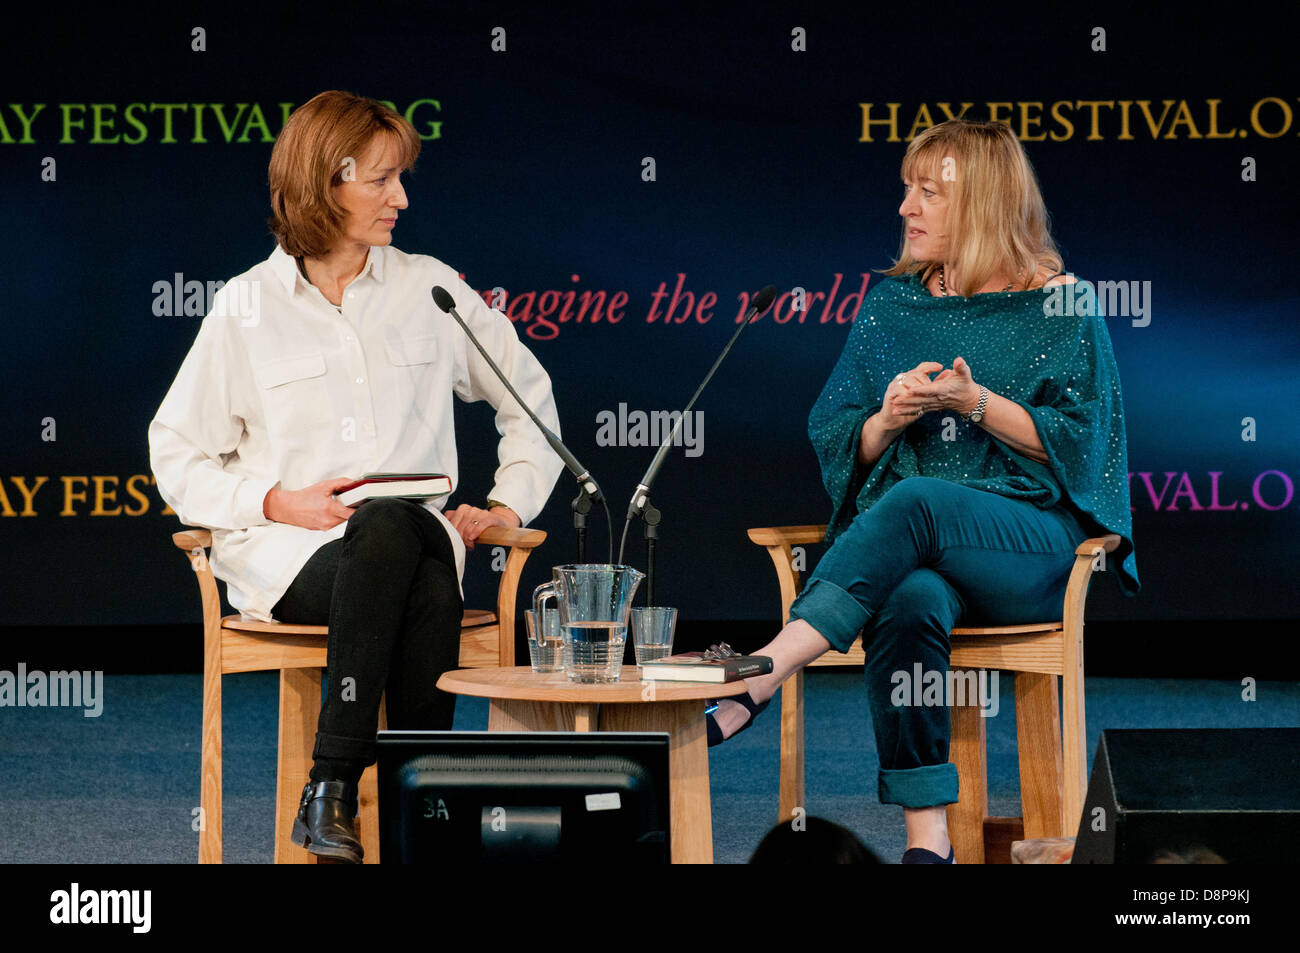 Hay on Wye, Powys, Wales, UK, Sunday 2 June 2013  Pictured: Jody Williams ( R ) talks to  Francine Stock  Re: The Telegraph Hay Festival, Hay on Wye, Powys, Wales. Stock Photo